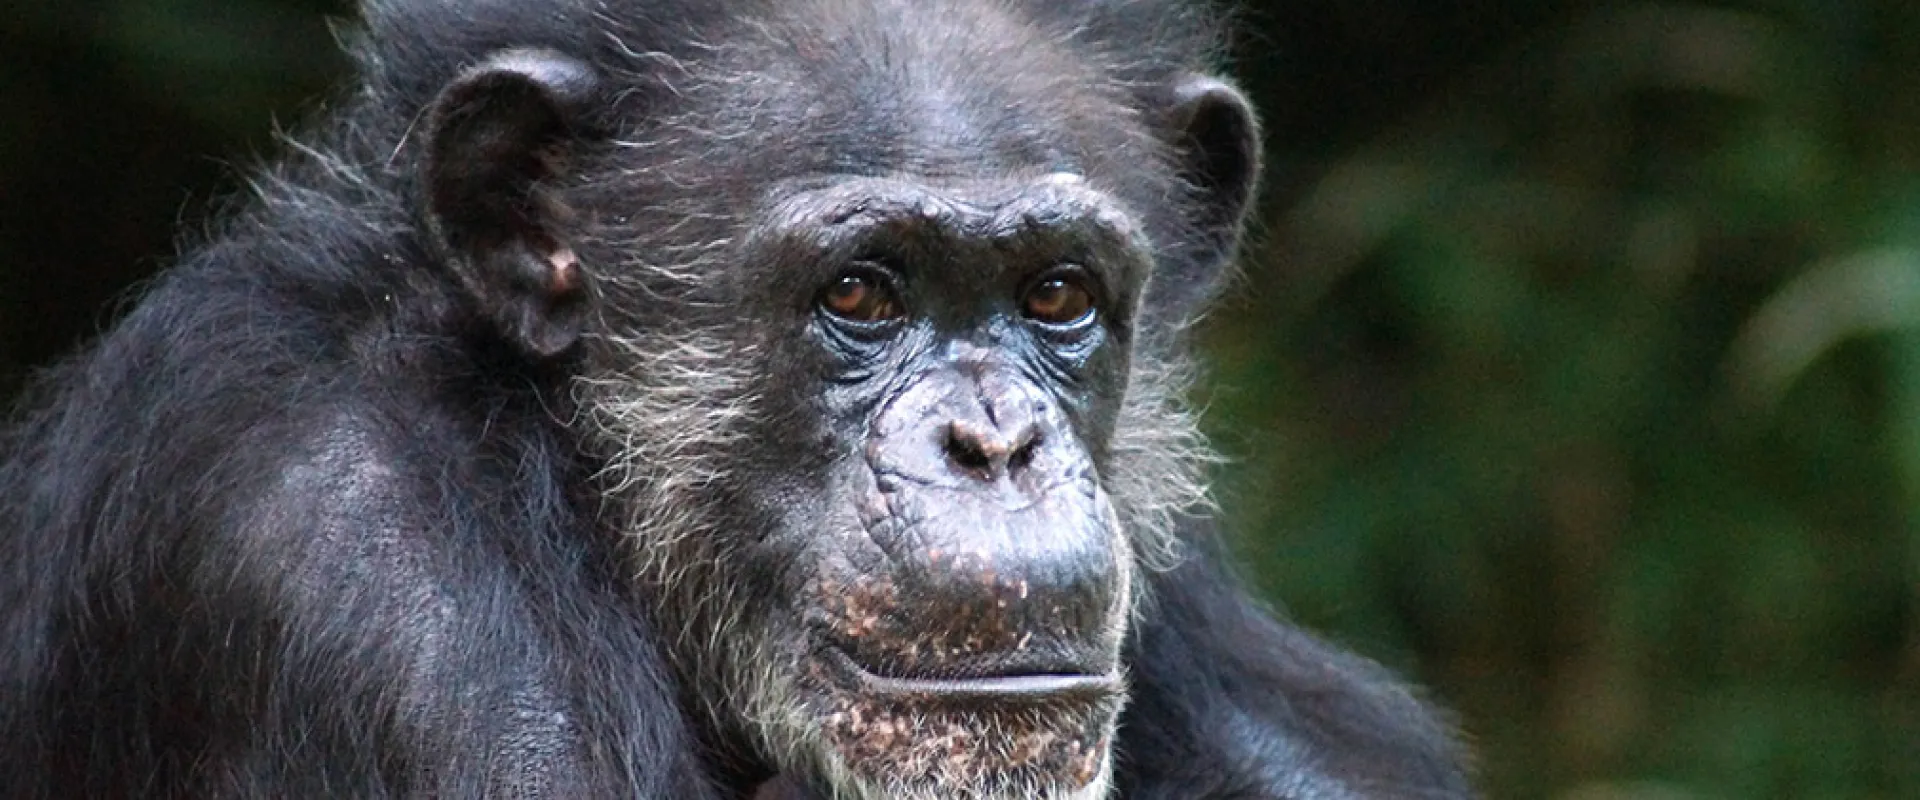 North Carolina Zoo Mourns the Loss of Chimp Maggie